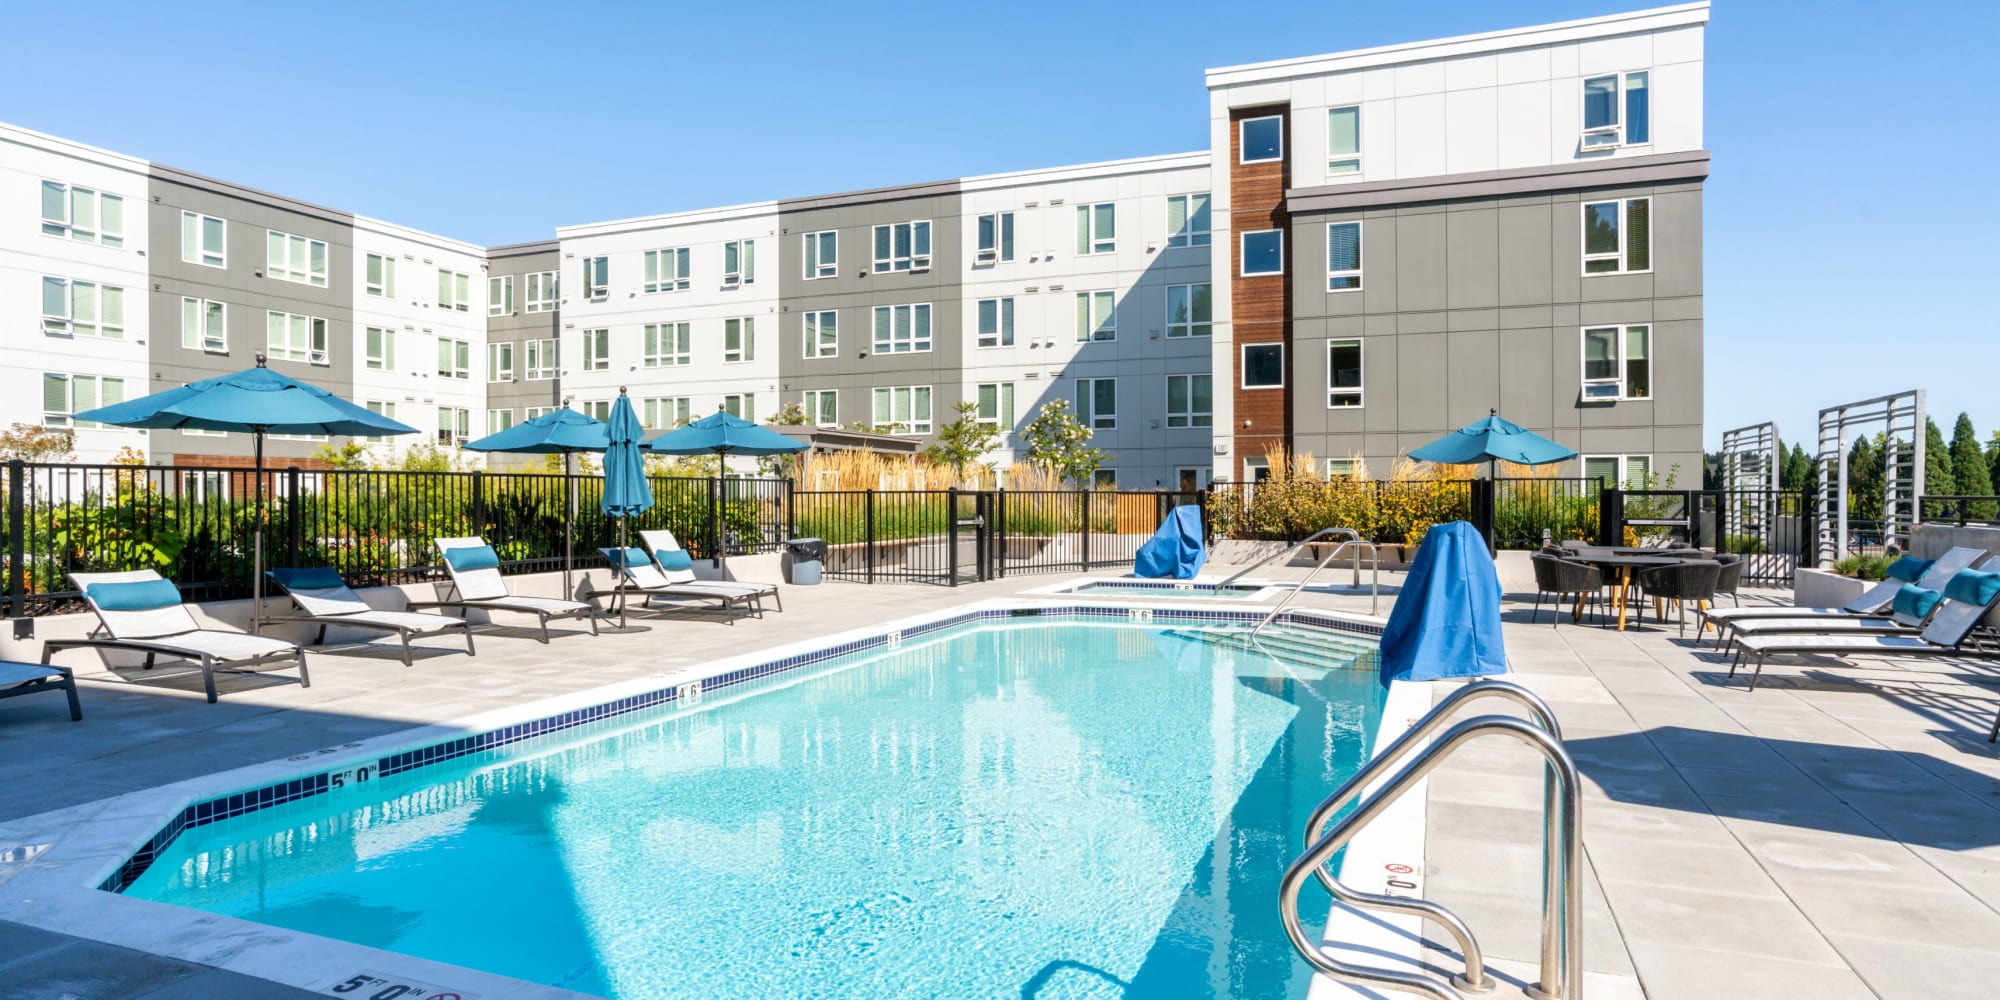 Outdoor pool at The Quarry apartments in Hillsboro, Oregon